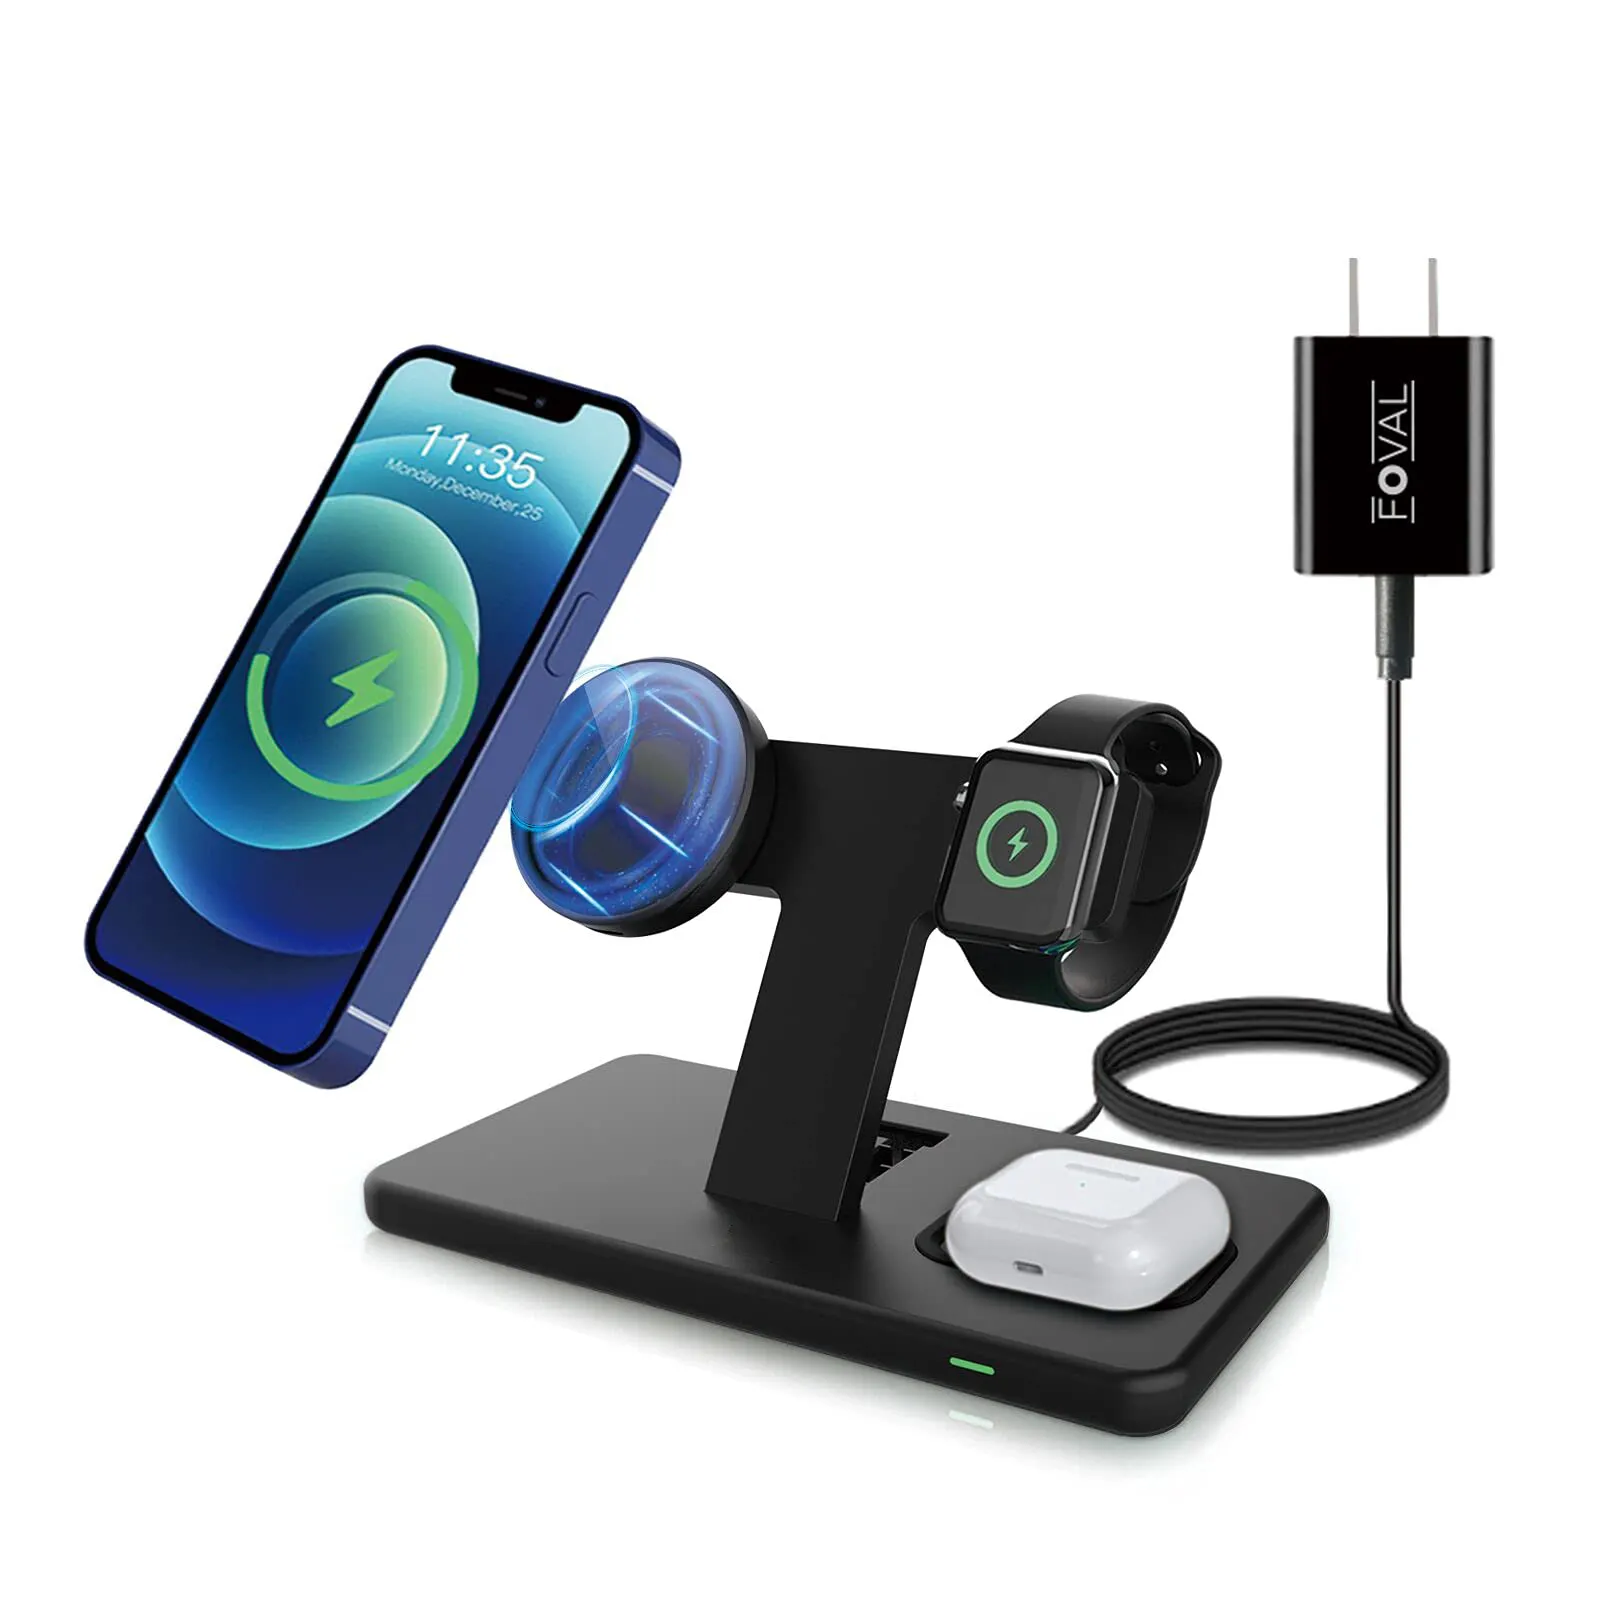 Wireless mobile charger mini project,for Apple smart phone wireless charger circuit